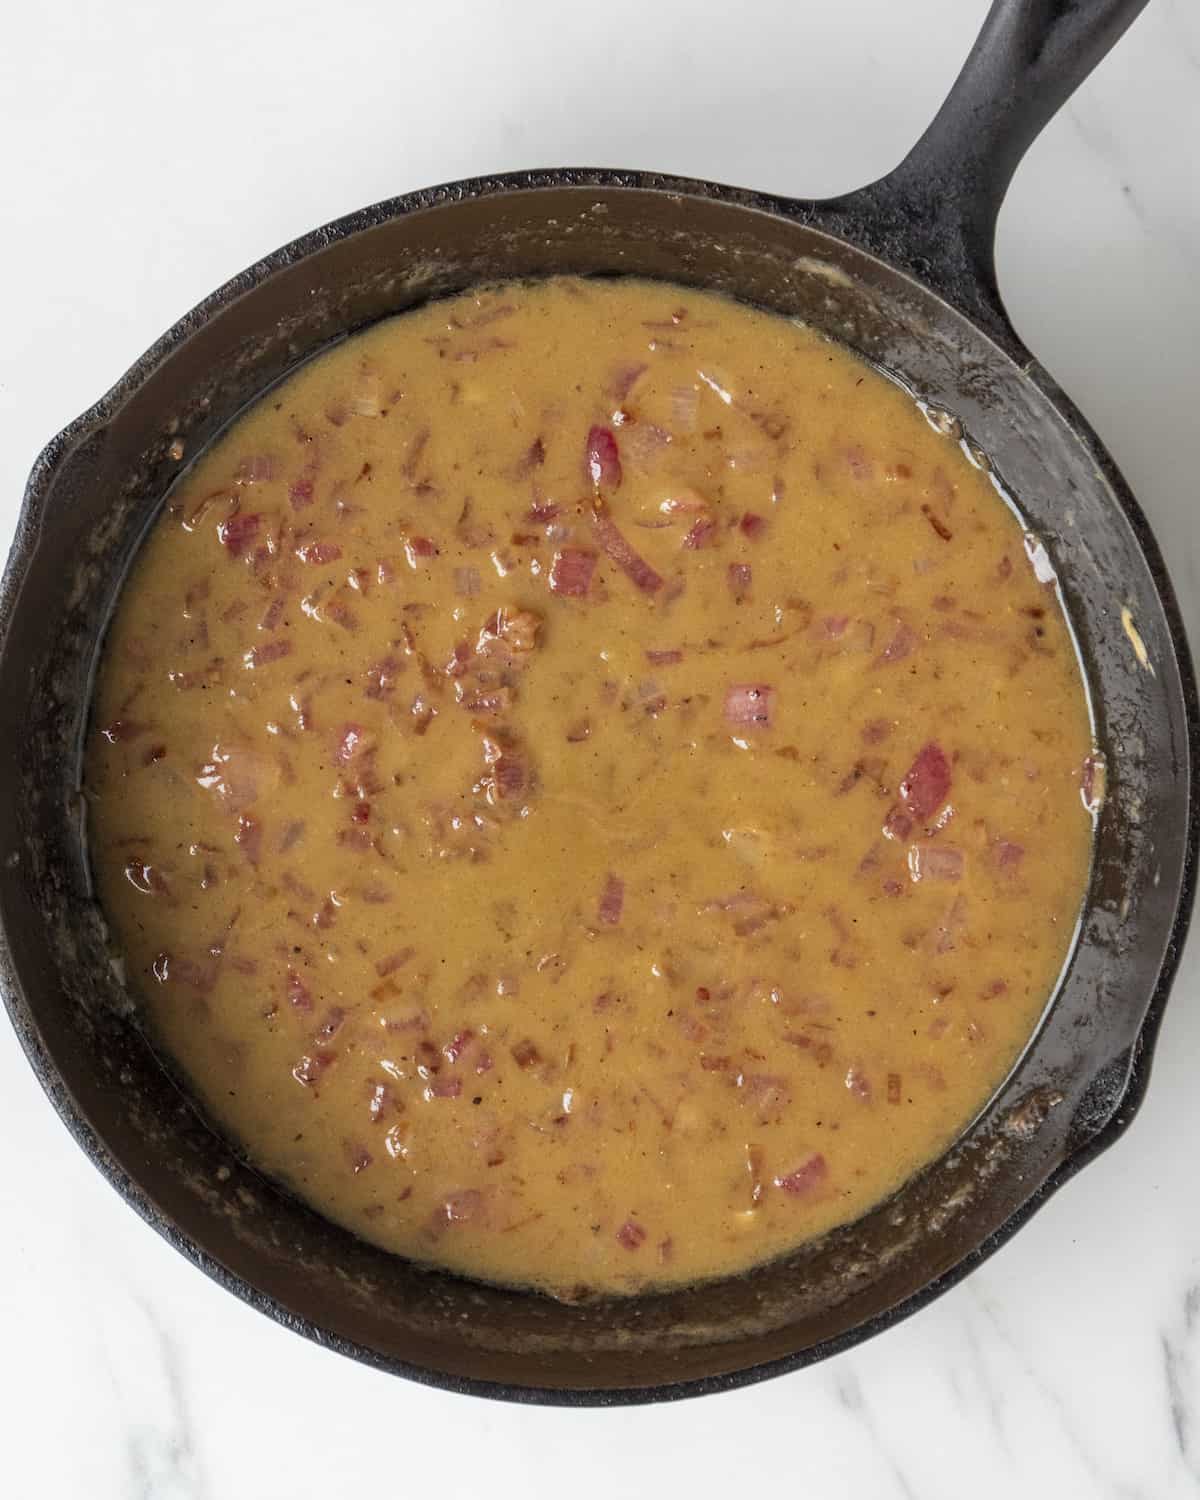 A warm potato salad dressing made of olive oil, champagne vinegar, red onion, and dijon mustard in a cast iron skillet.